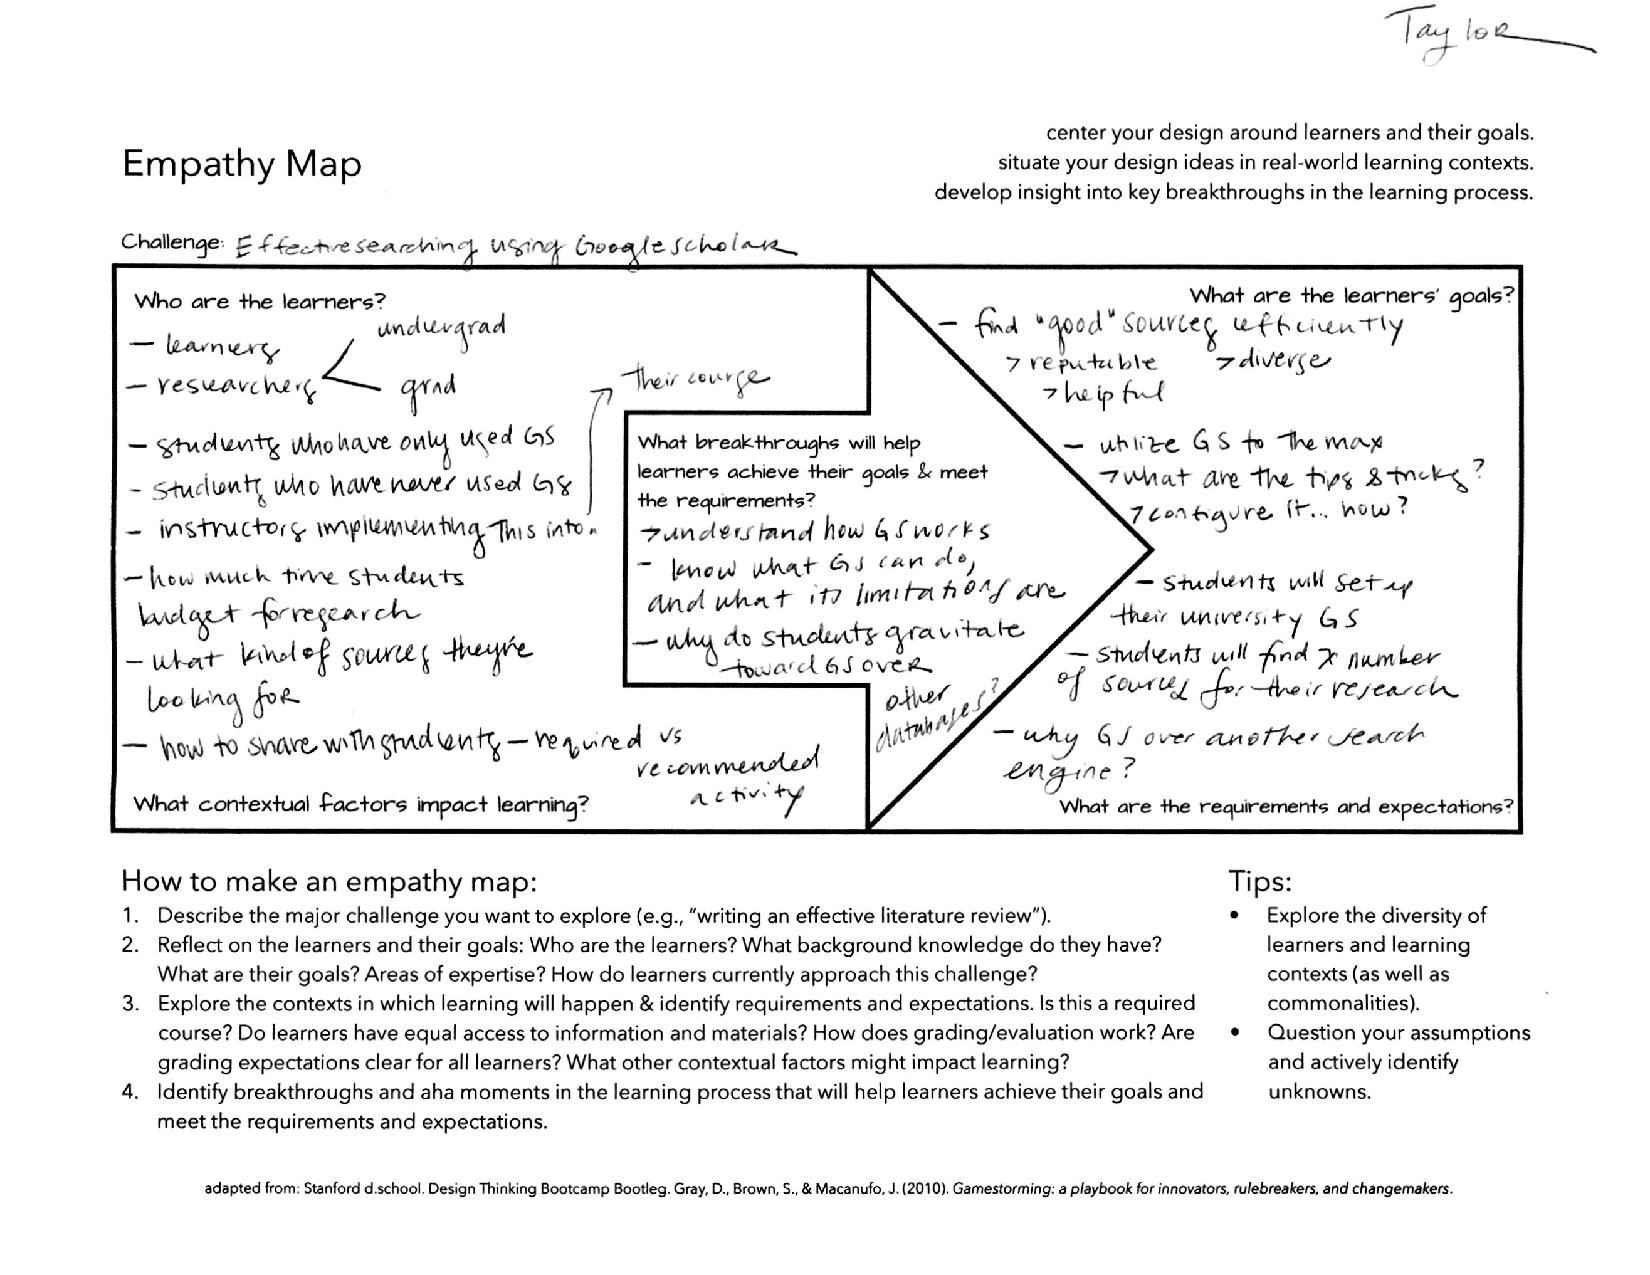 An empathy map identifying learner characteristics and goals.